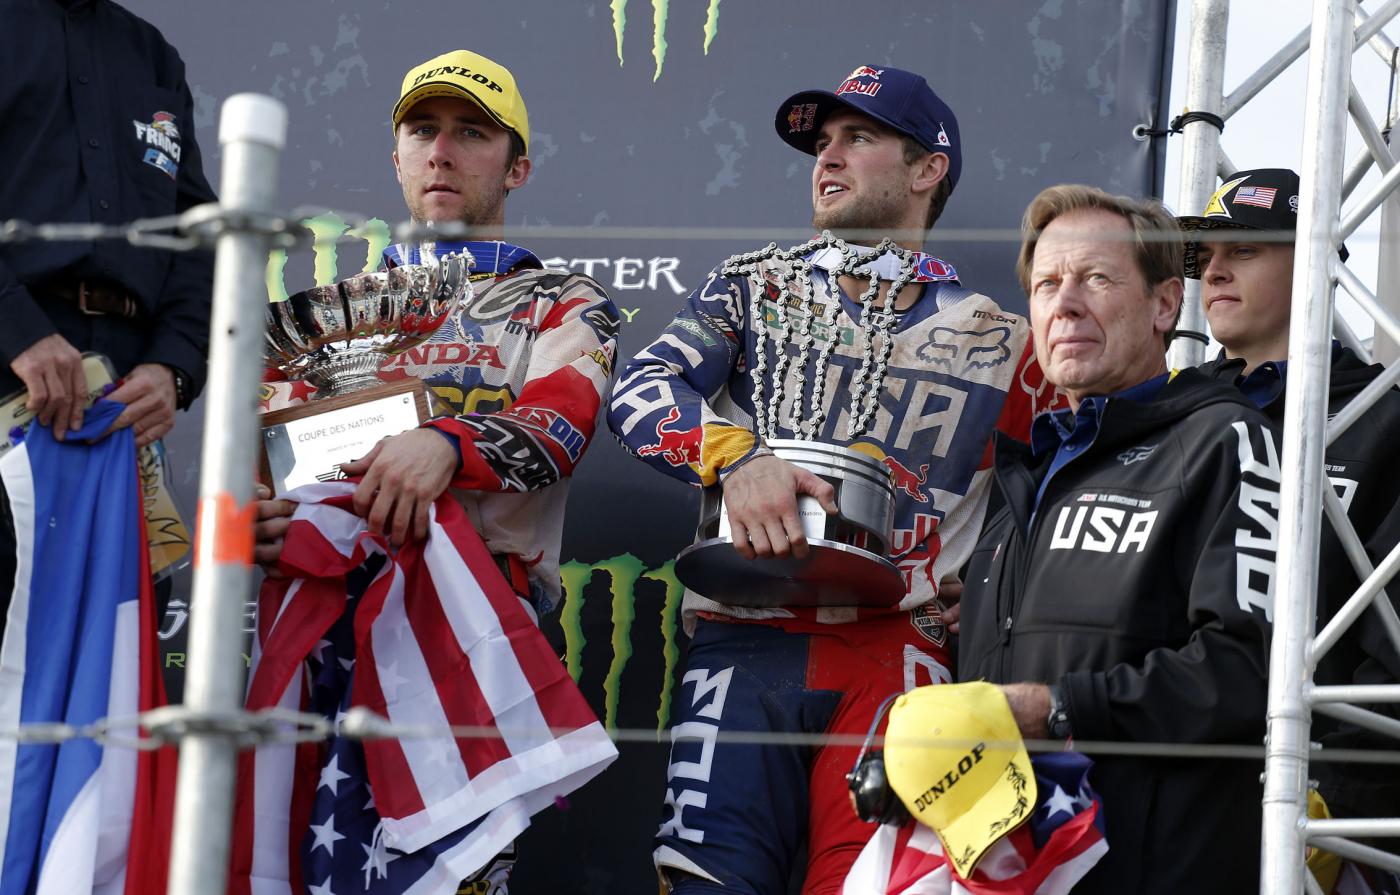 Gallery: Motocross of Nations - Racer X